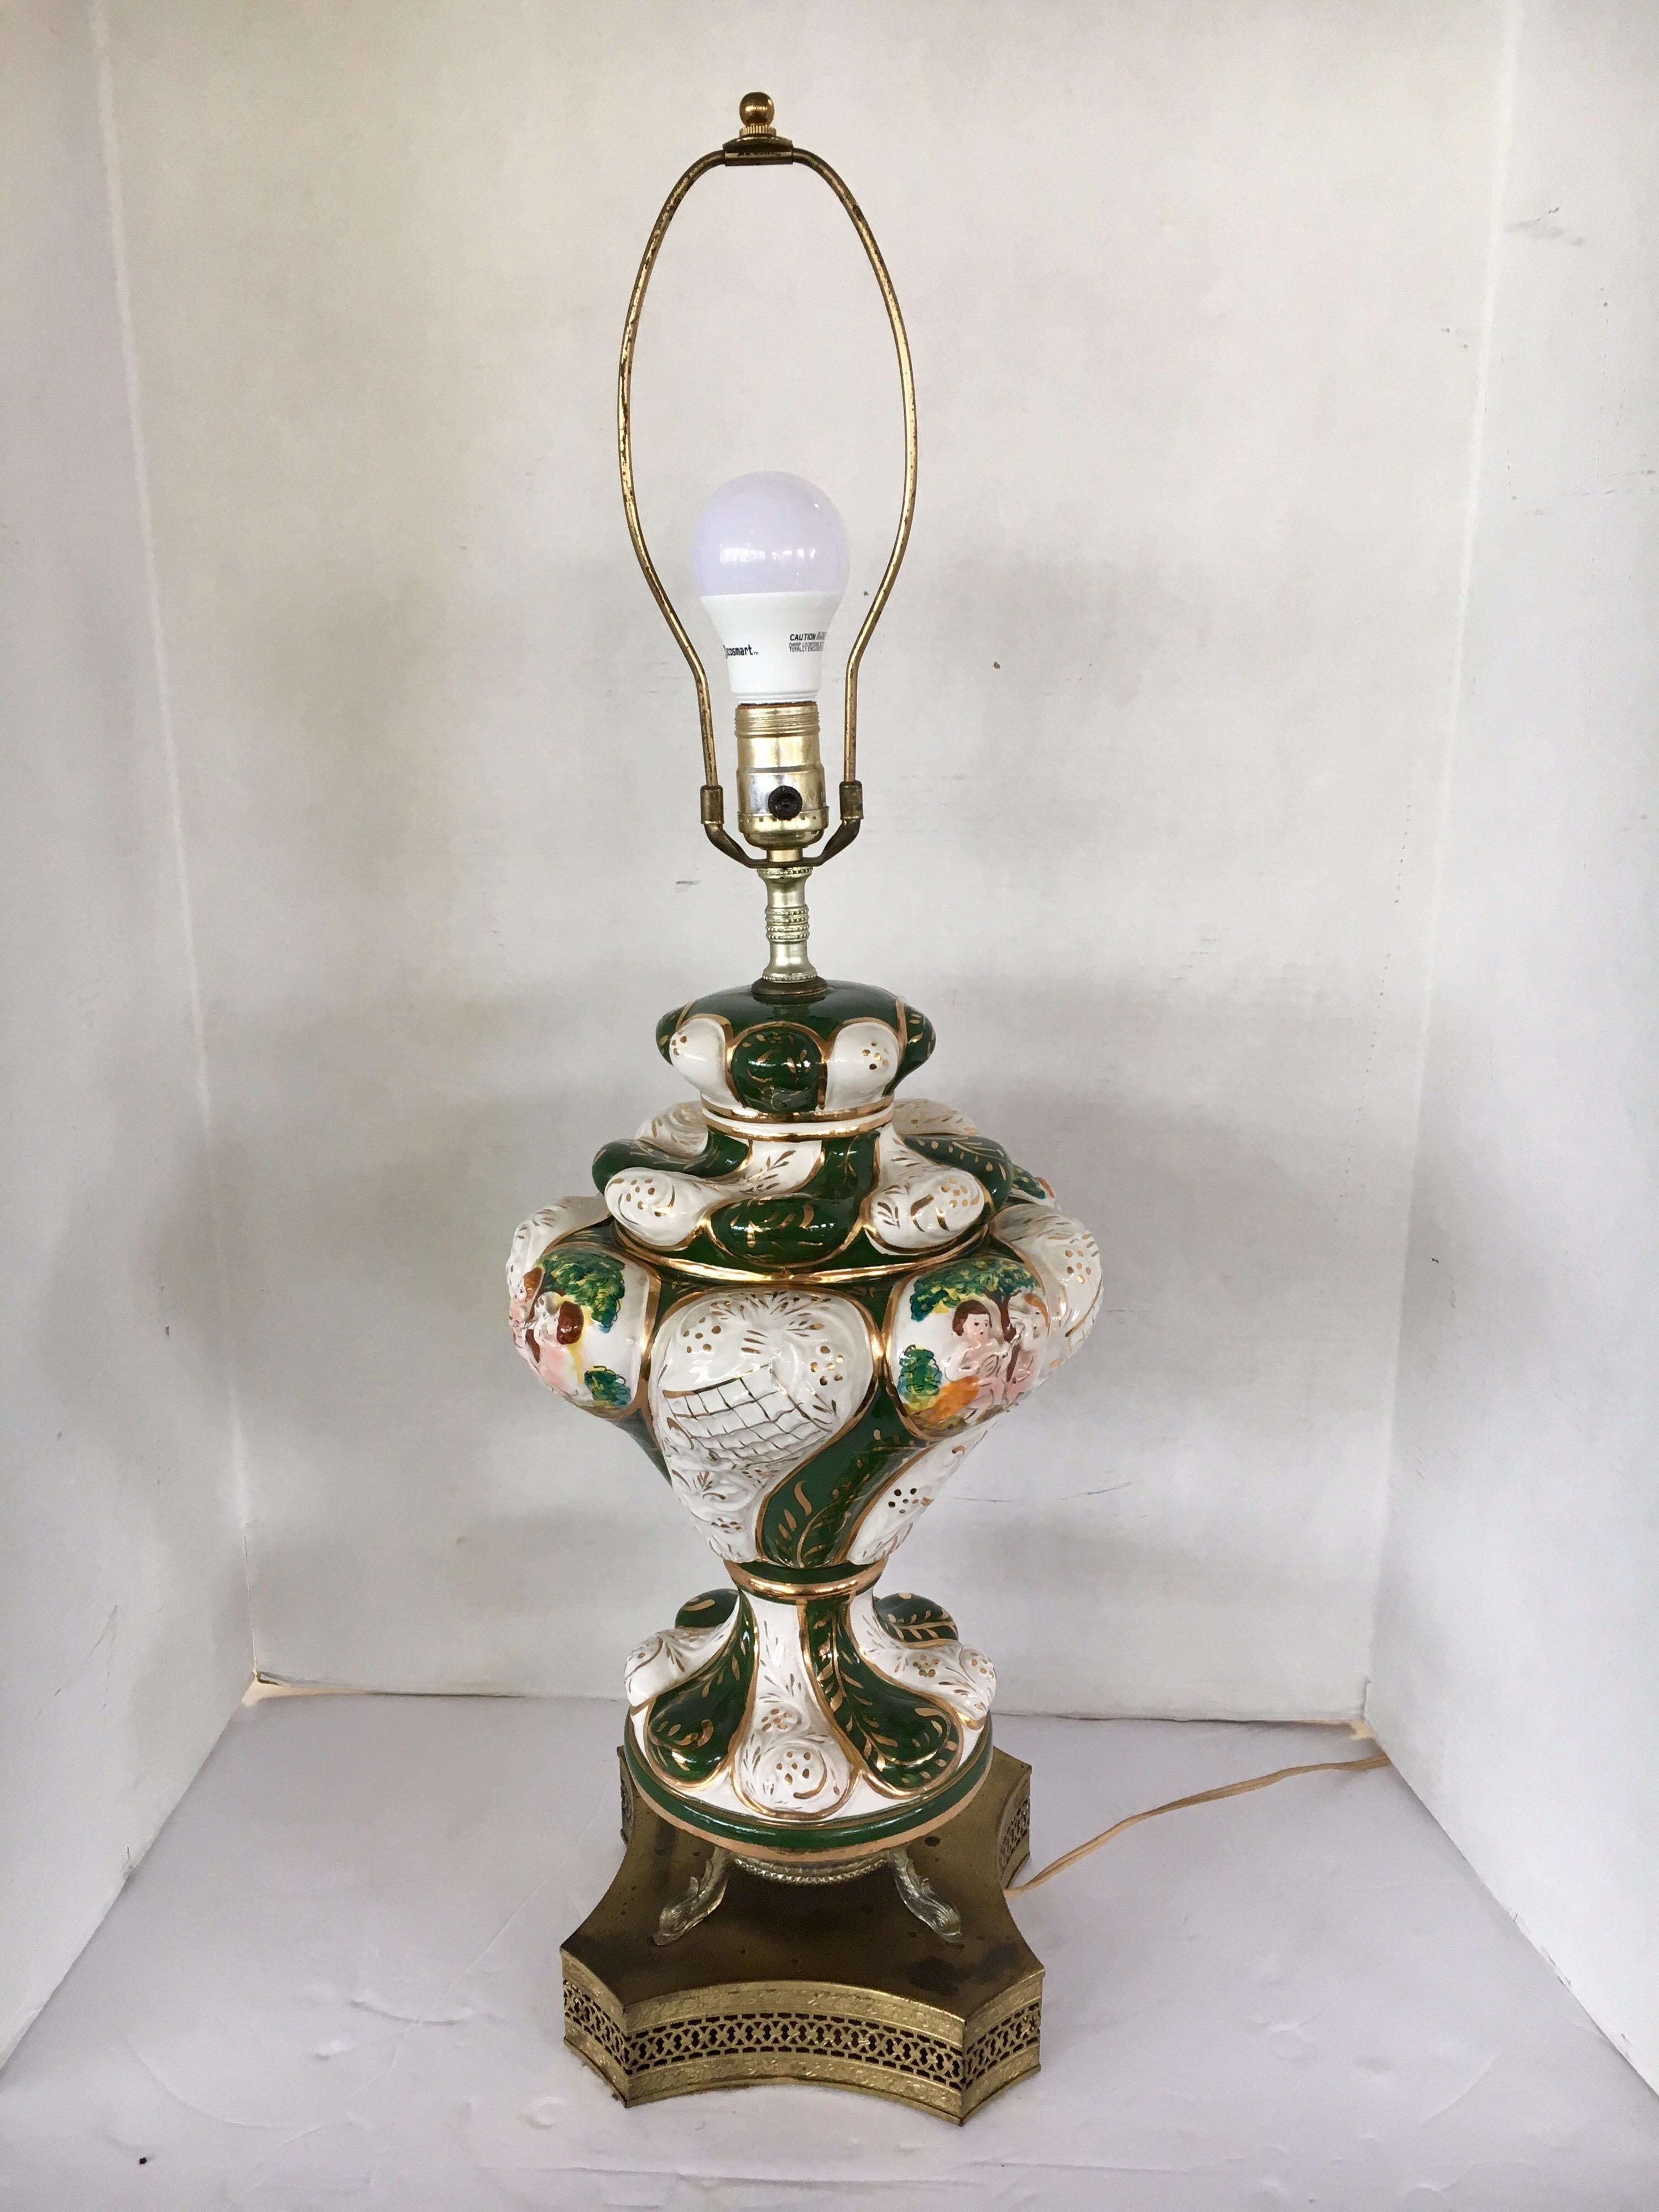 Vibrant ornate table lamp with vivid colors including green. Wired for US and in perfect working order,
circa 1950s Italy.